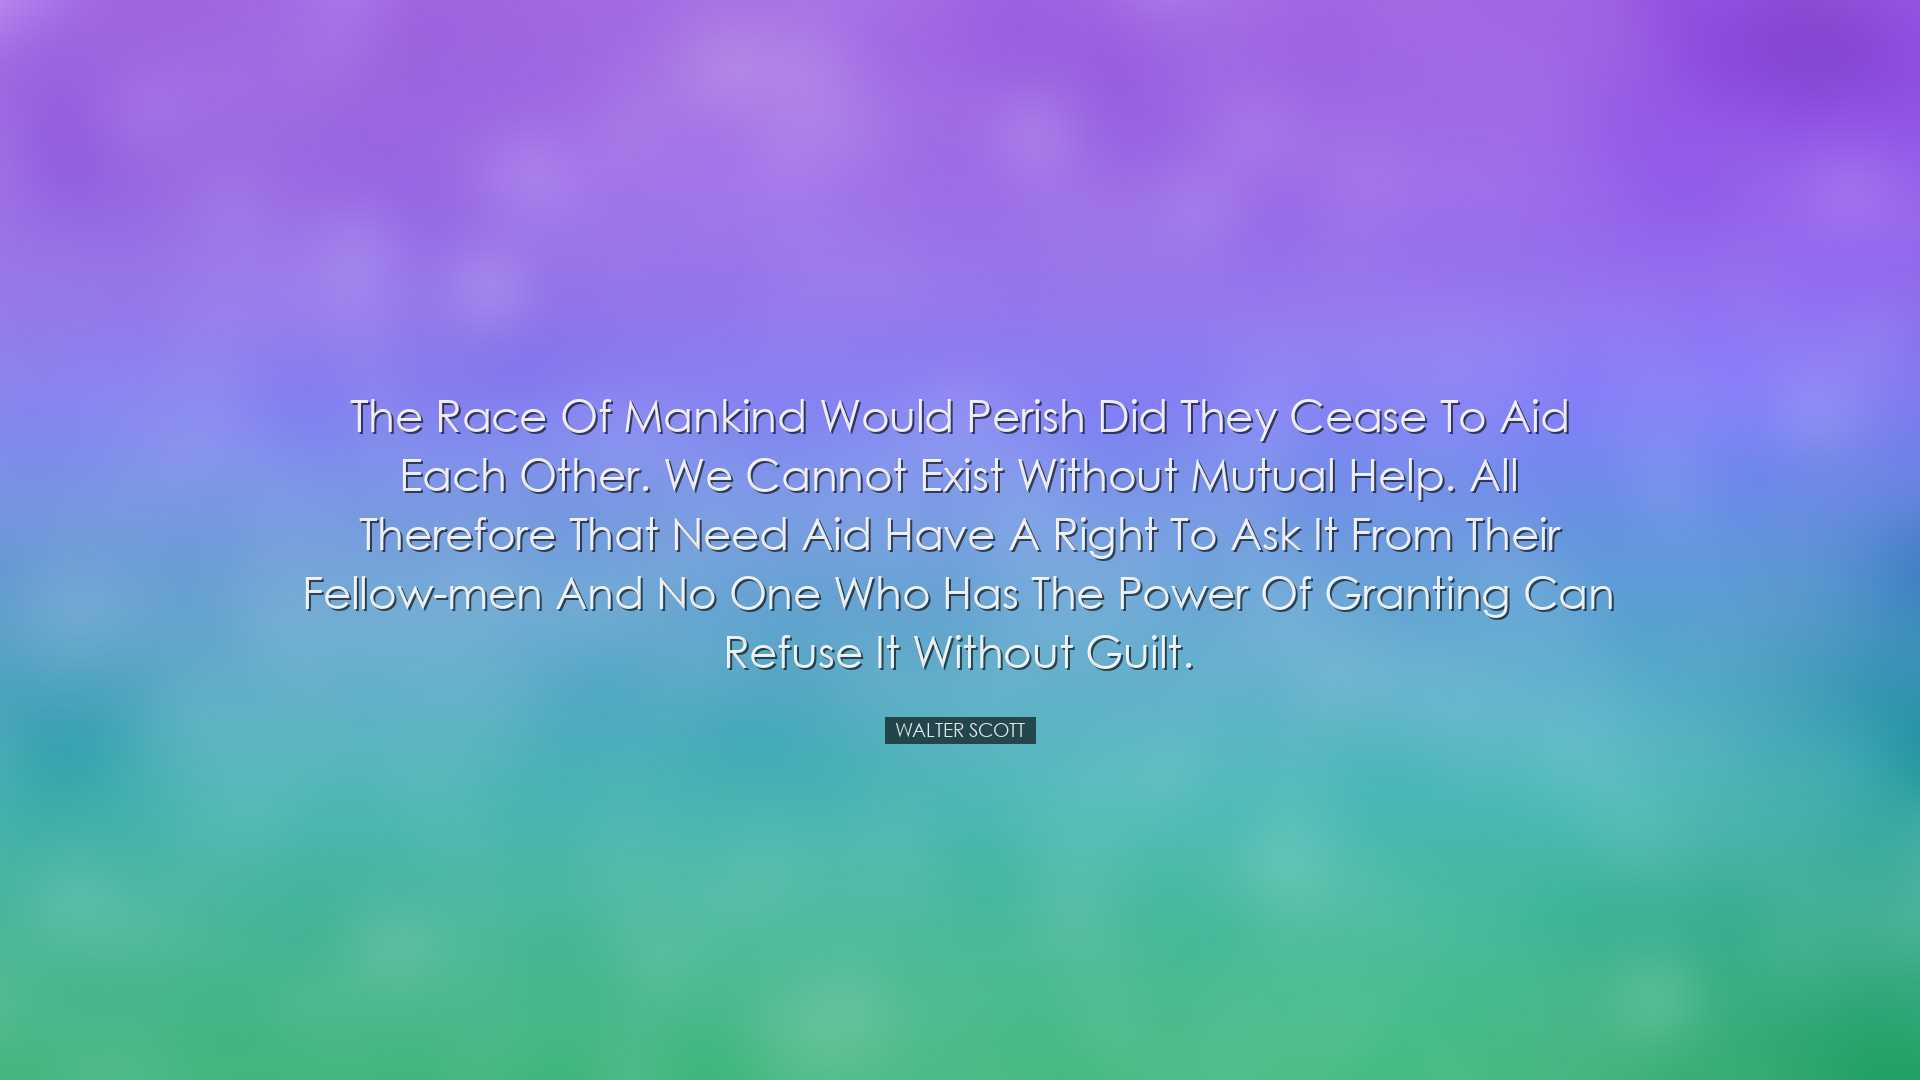 The race of mankind would perish did they cease to aid each other.